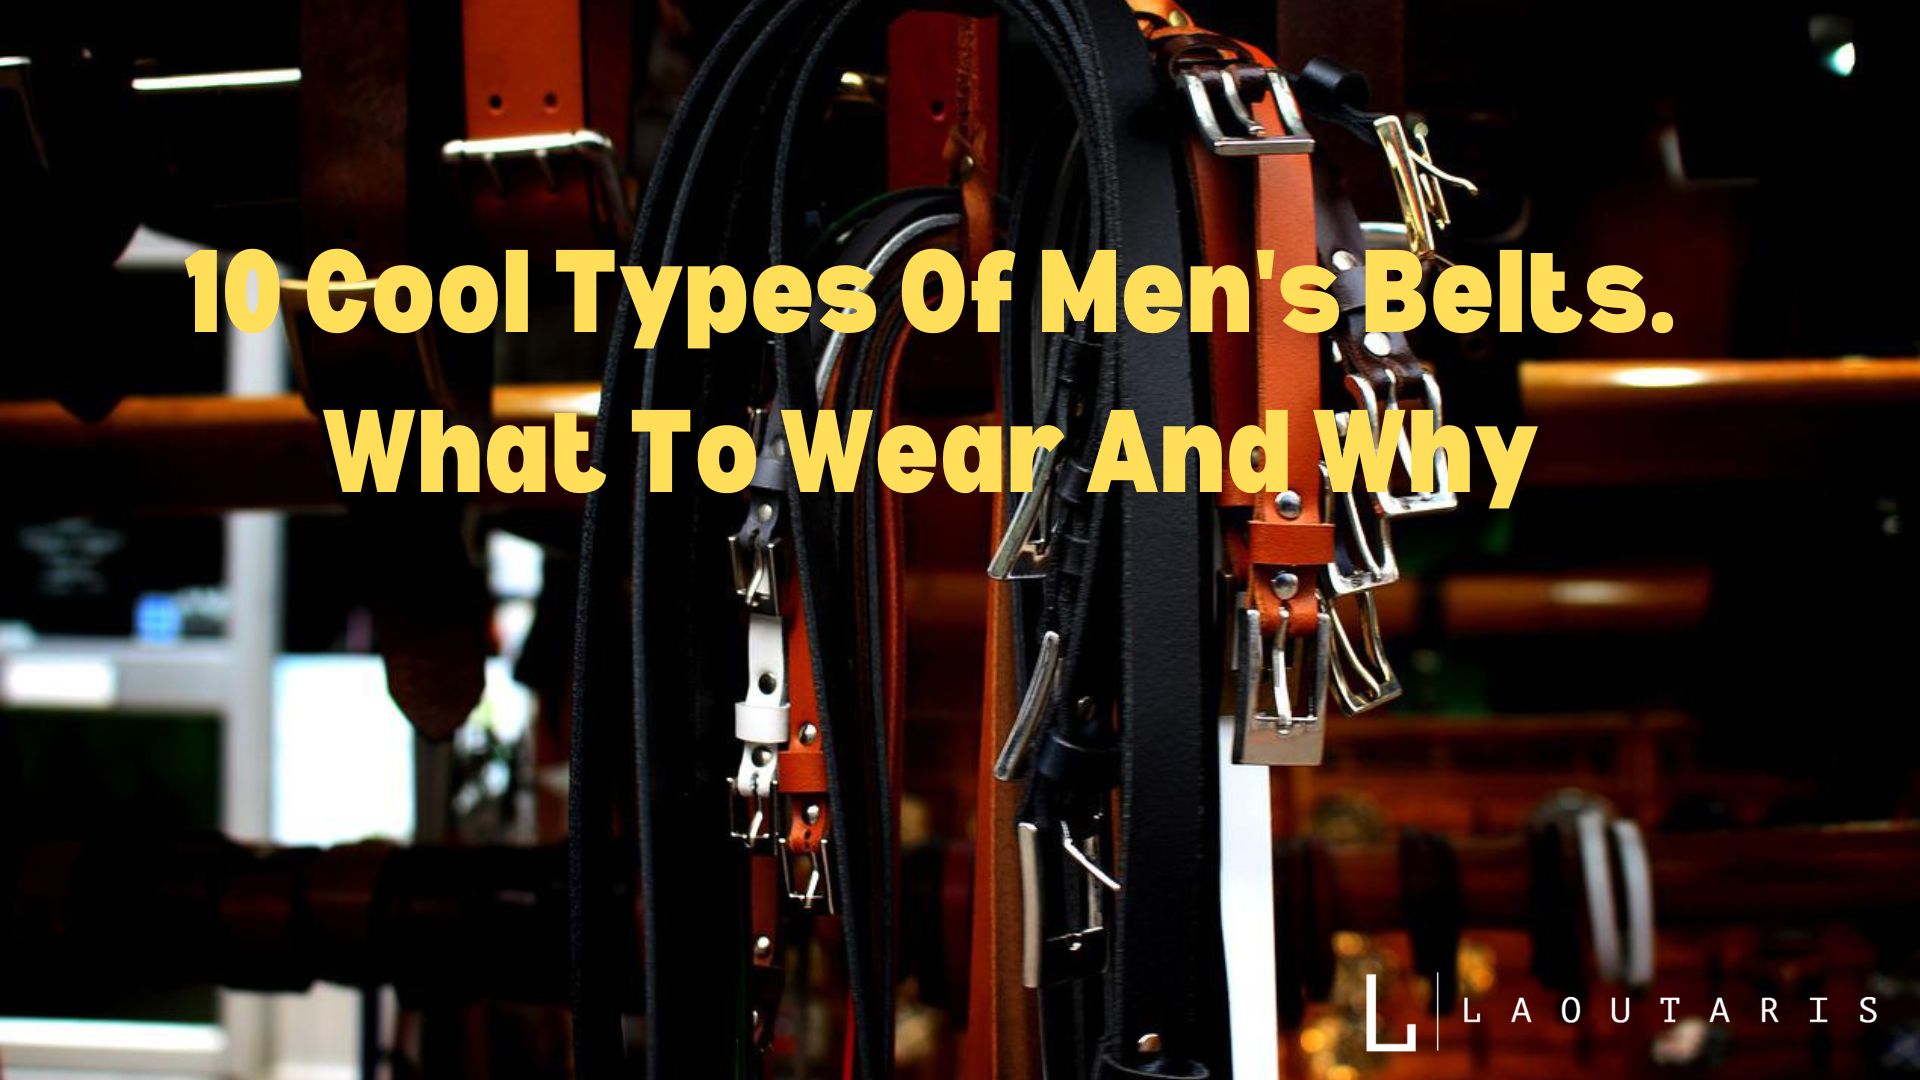 10 Cool Types Of Men's Belts. What To Wear And Why.